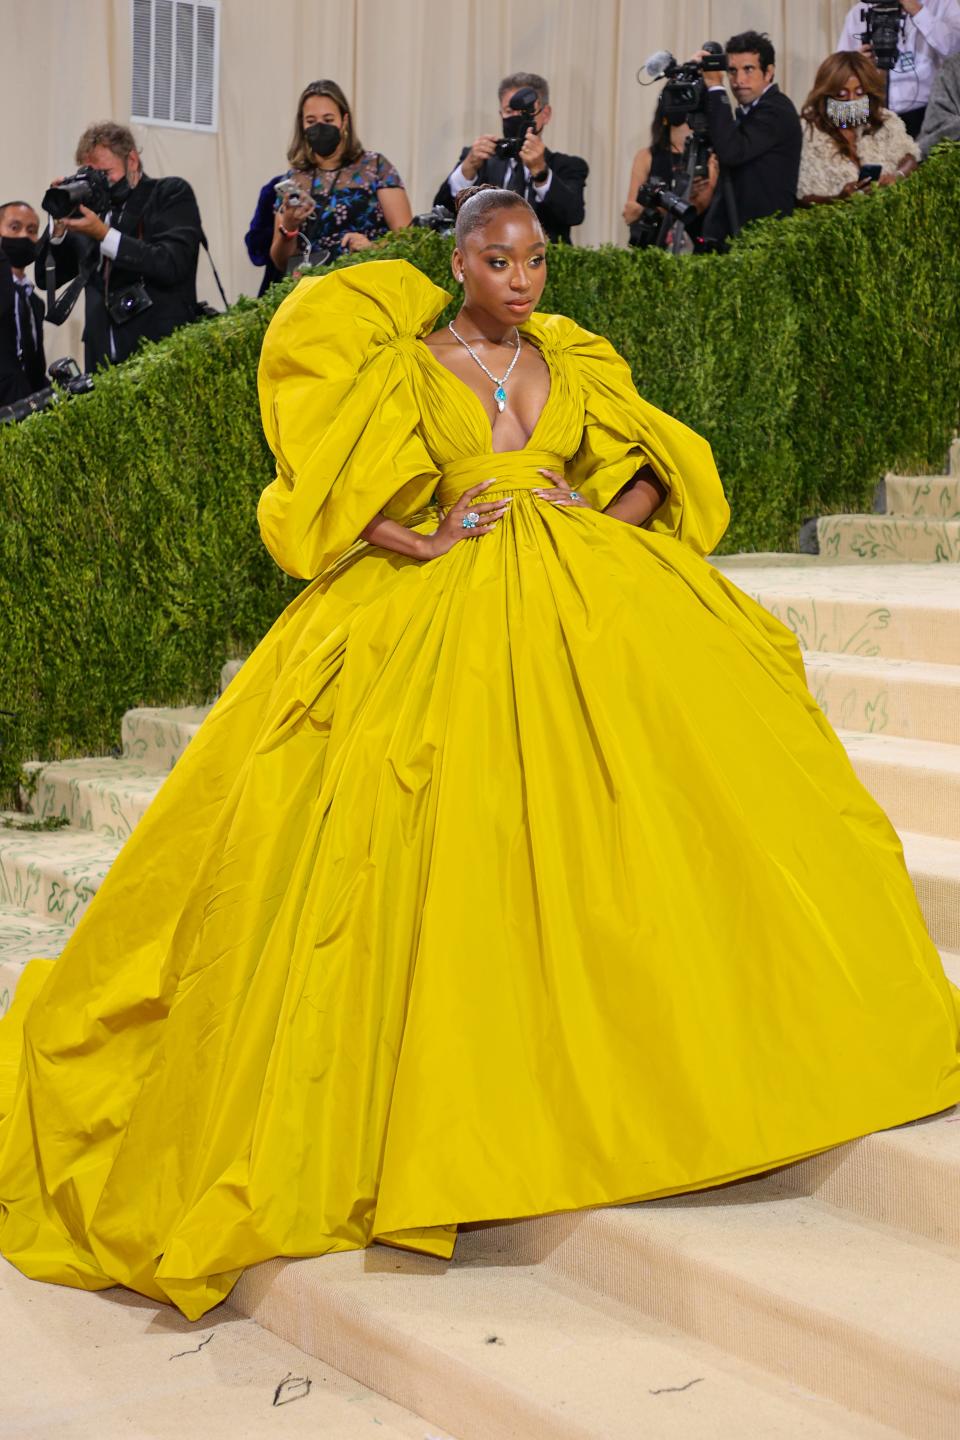 Normani at the 2021 Met Gala.